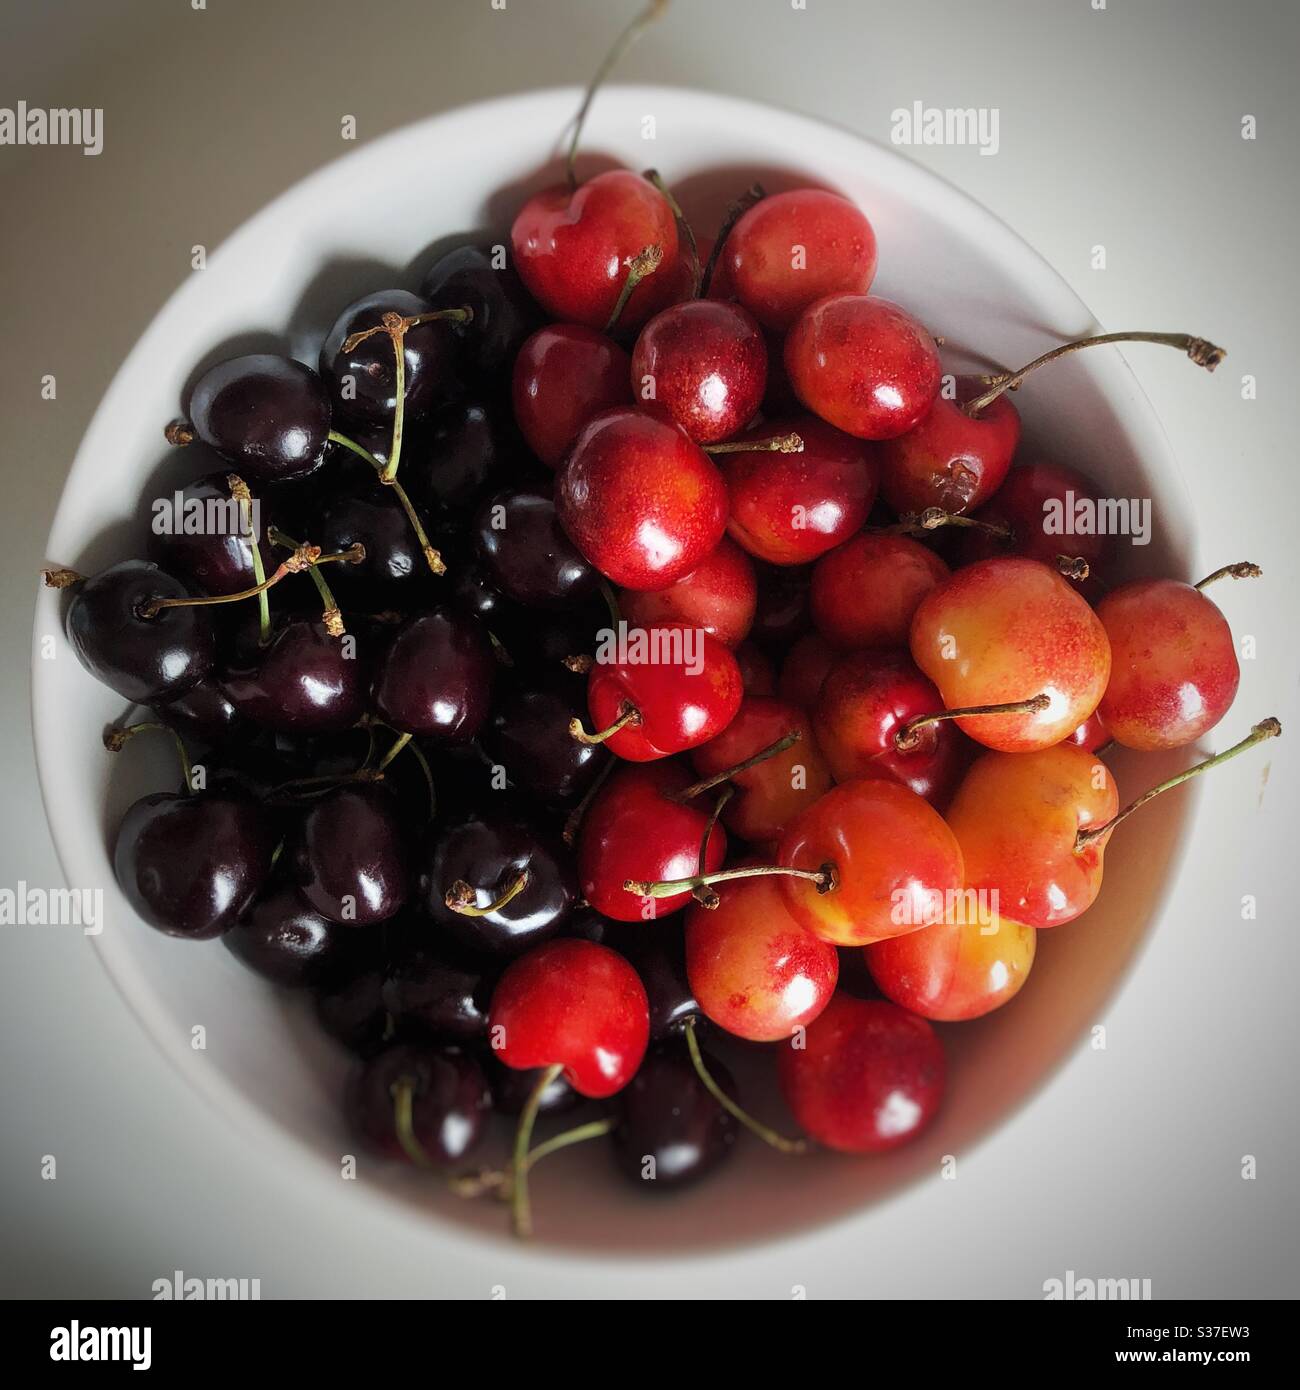 Different types of sweet cherries in white bowl Stock Photo